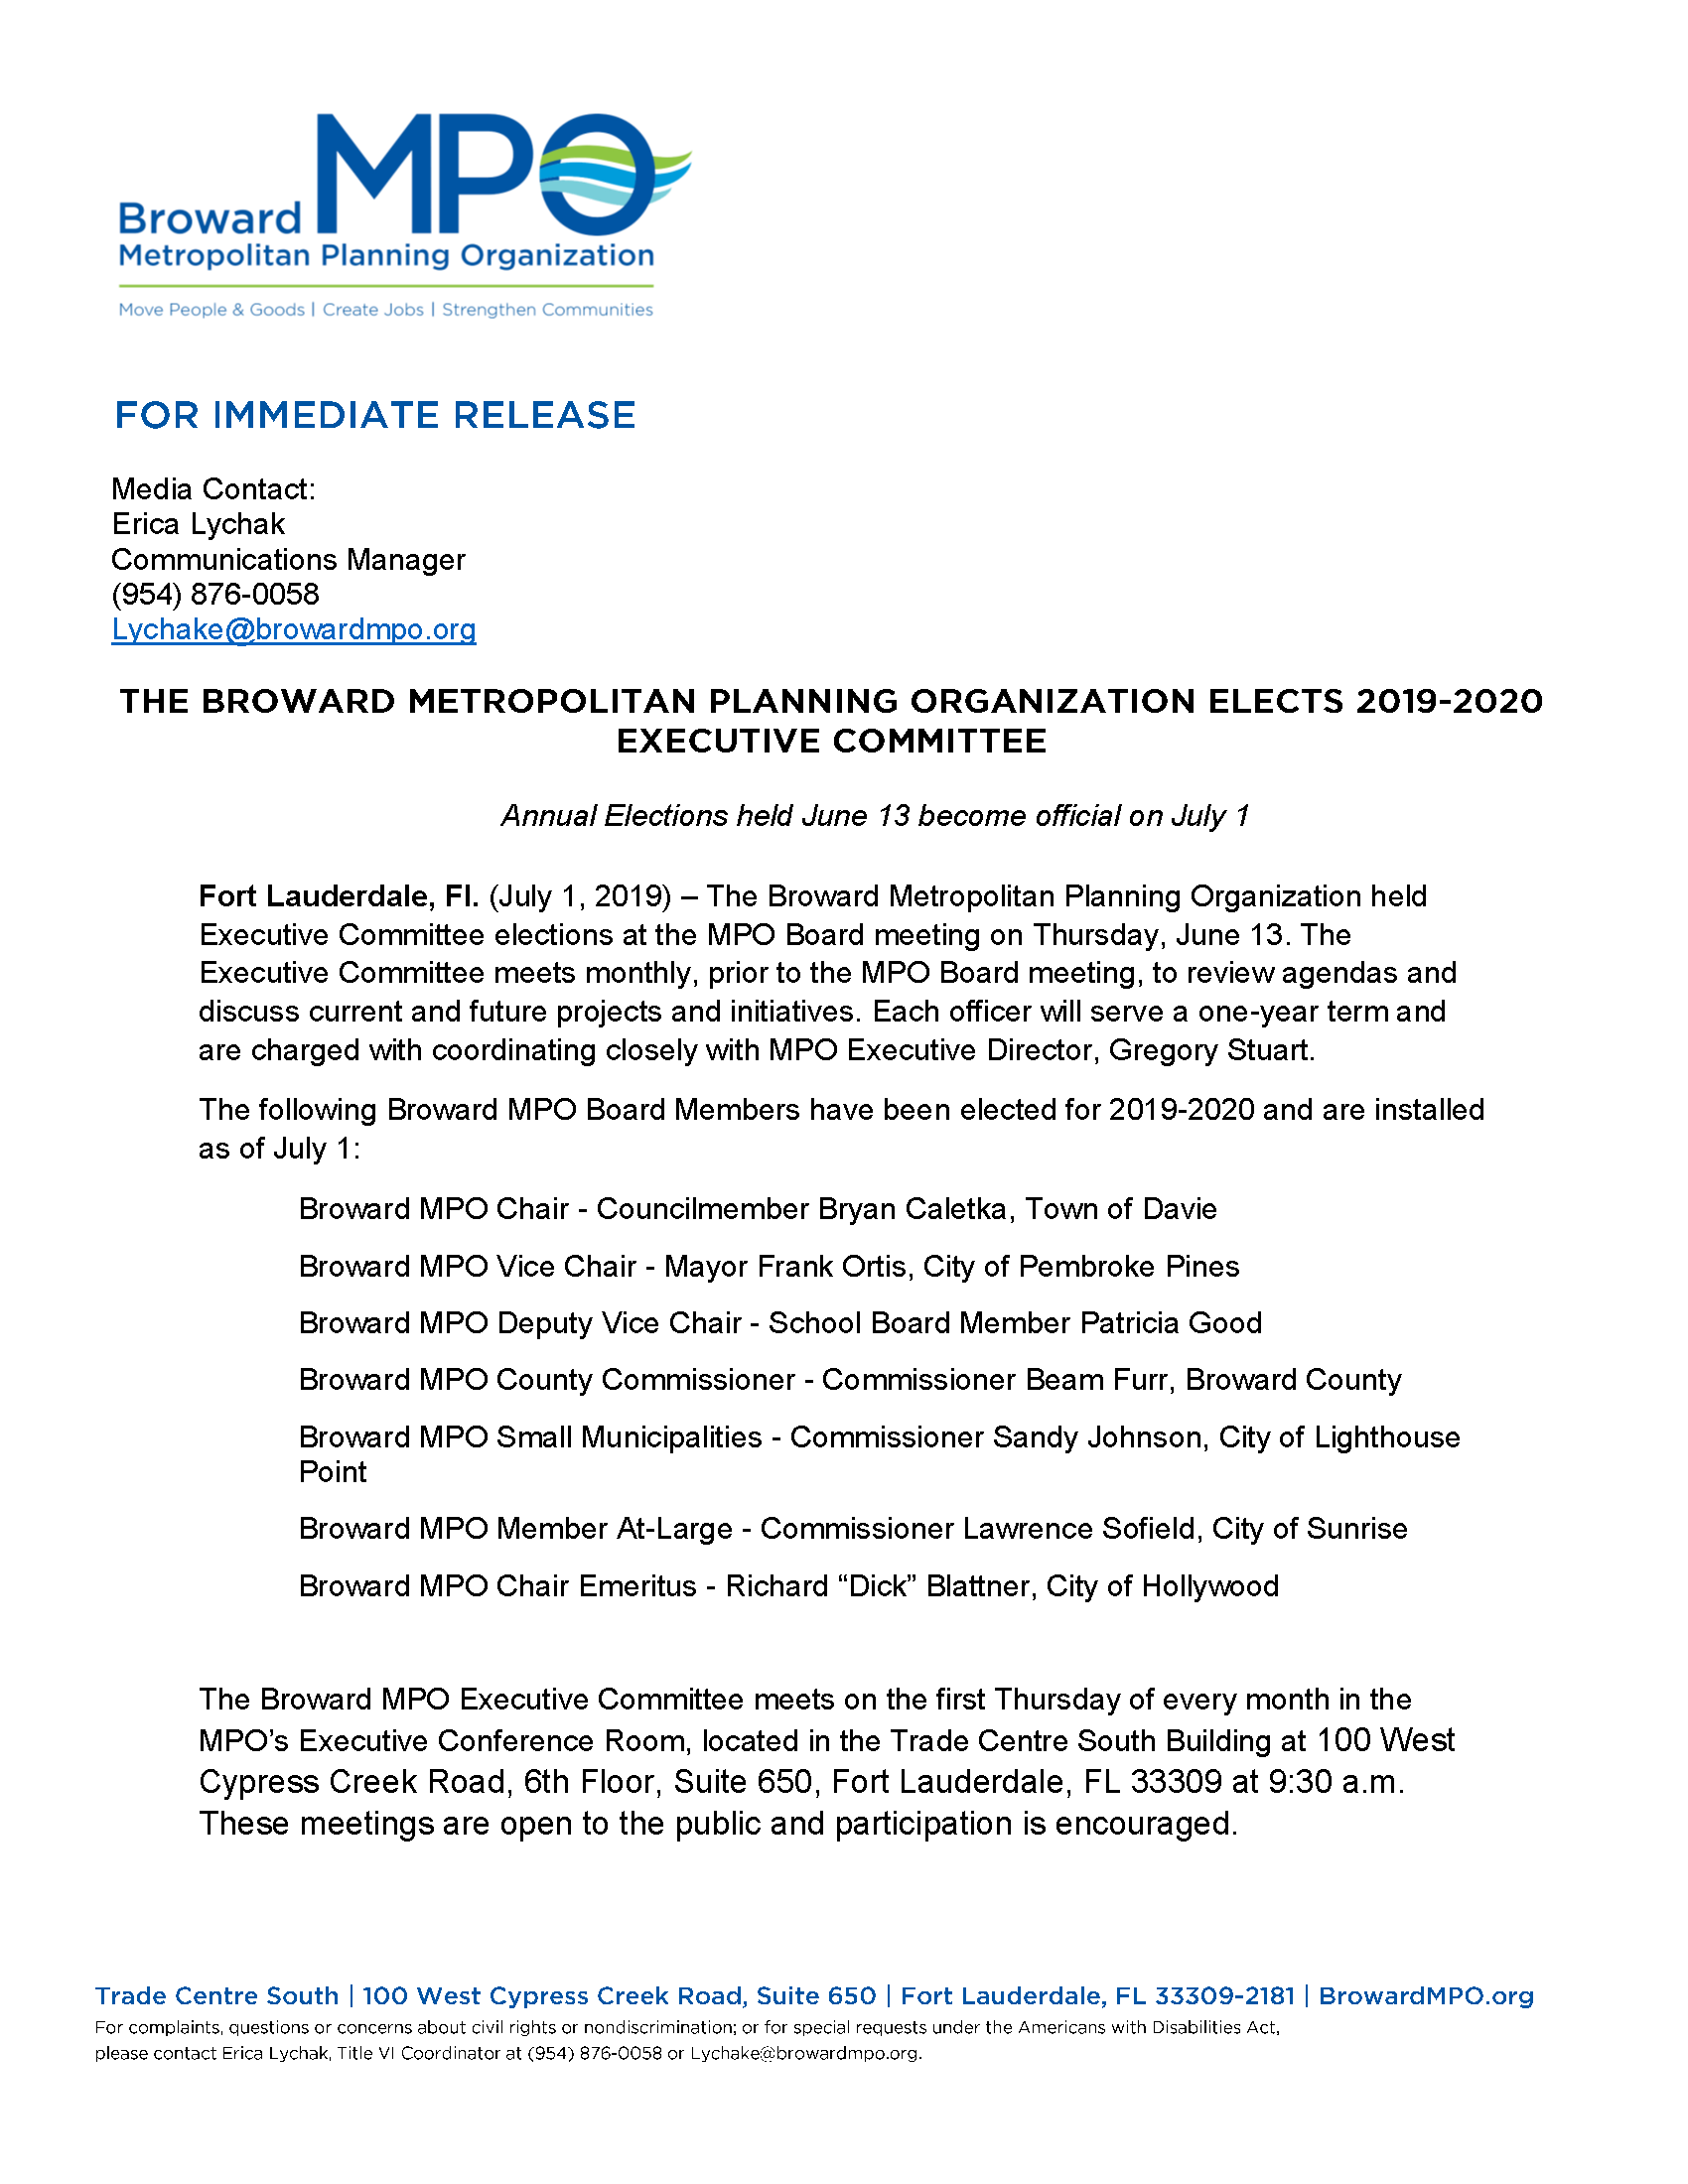 20190791 Executive Committee press release Page 1